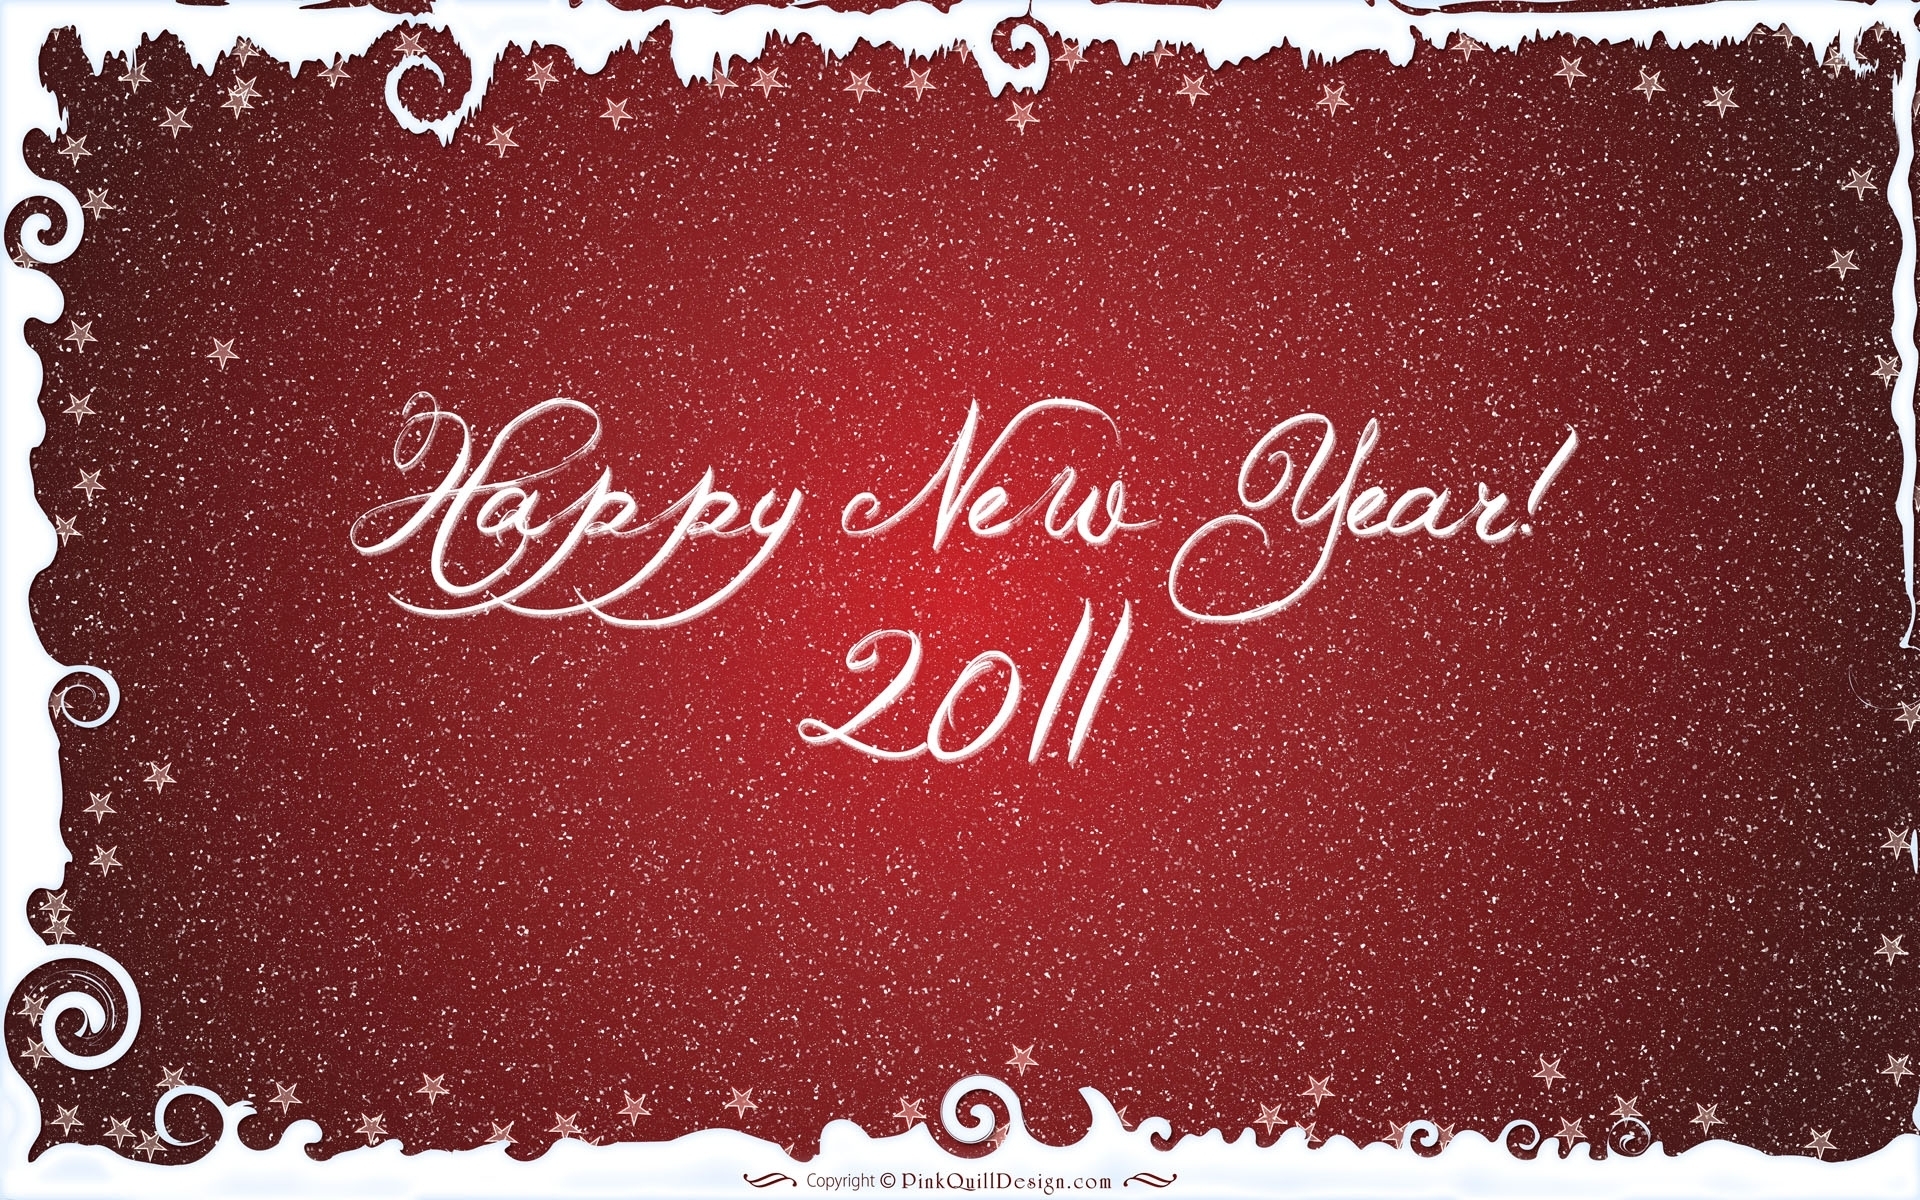 Happy New Year 2011 for 1920 x 1200 widescreen resolution